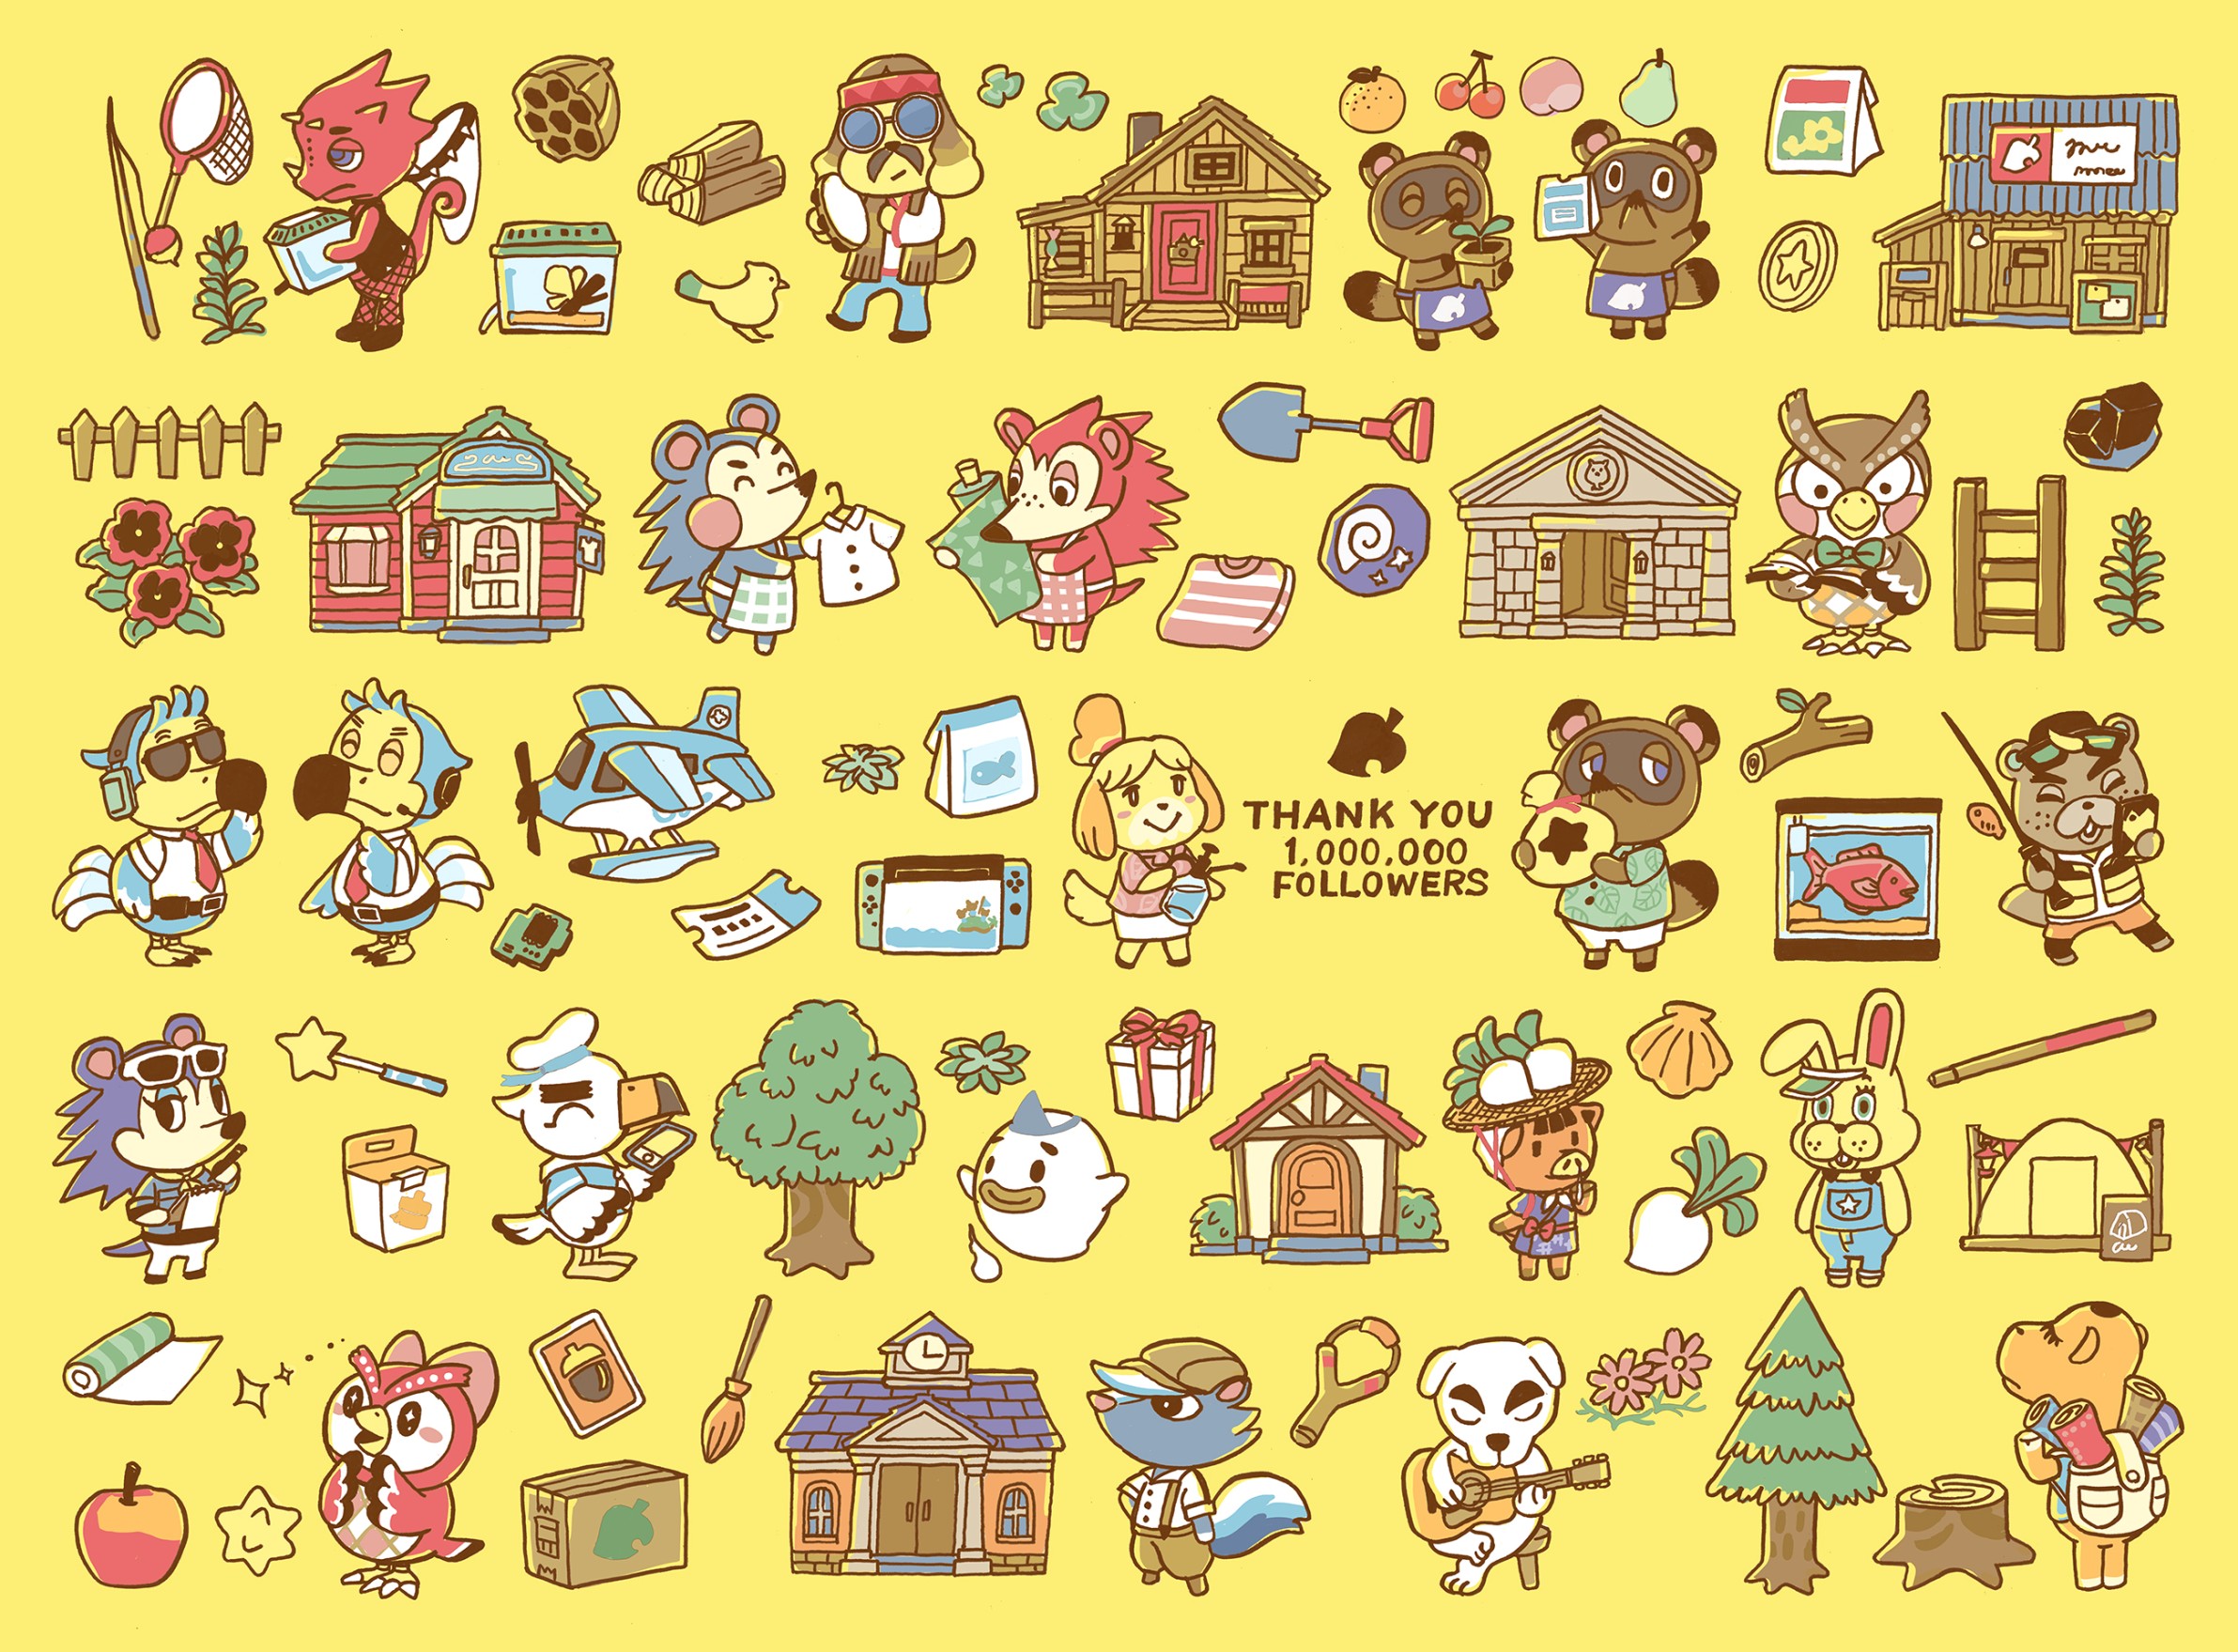 Get Animal Crossing: New Horizons Phone & Desktop Wallpapers Created From  New Official Artwork - Animal Crossing World